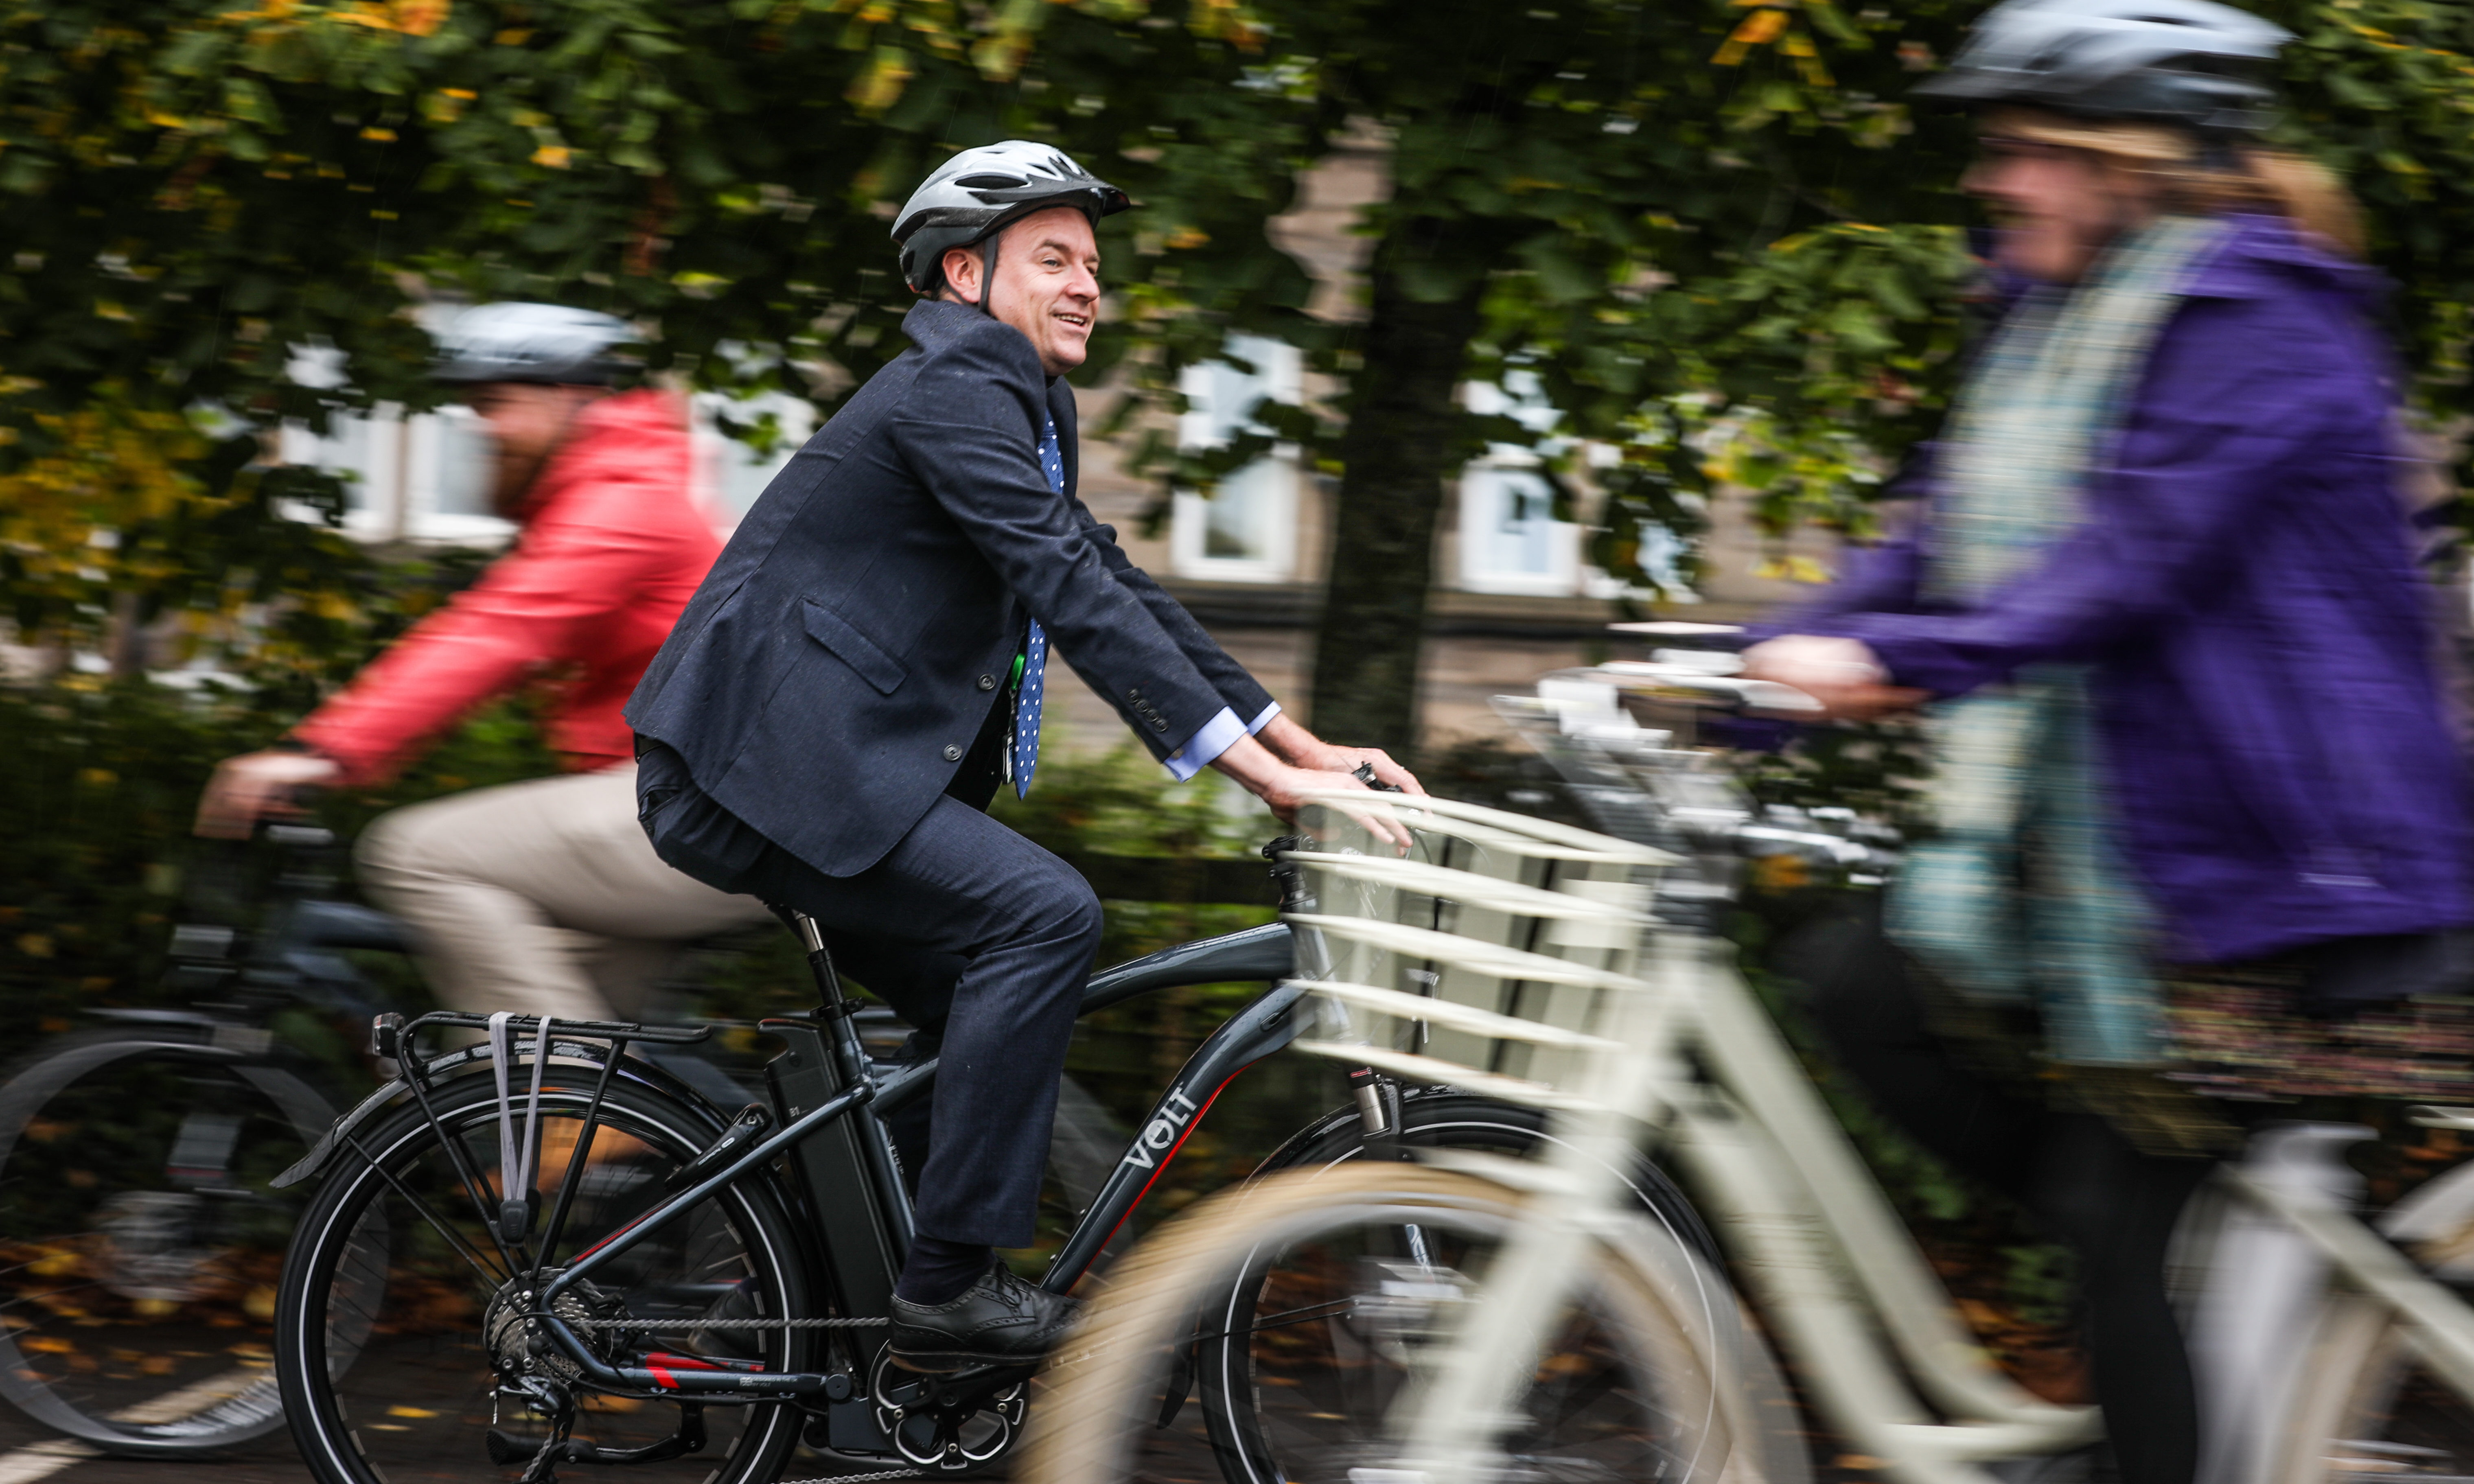 During the PATH Way to Work event, people from Perth had the chance to try out e-bikes and the group are calling for better infrastructure to encourage more people to make the change from travelling by car.